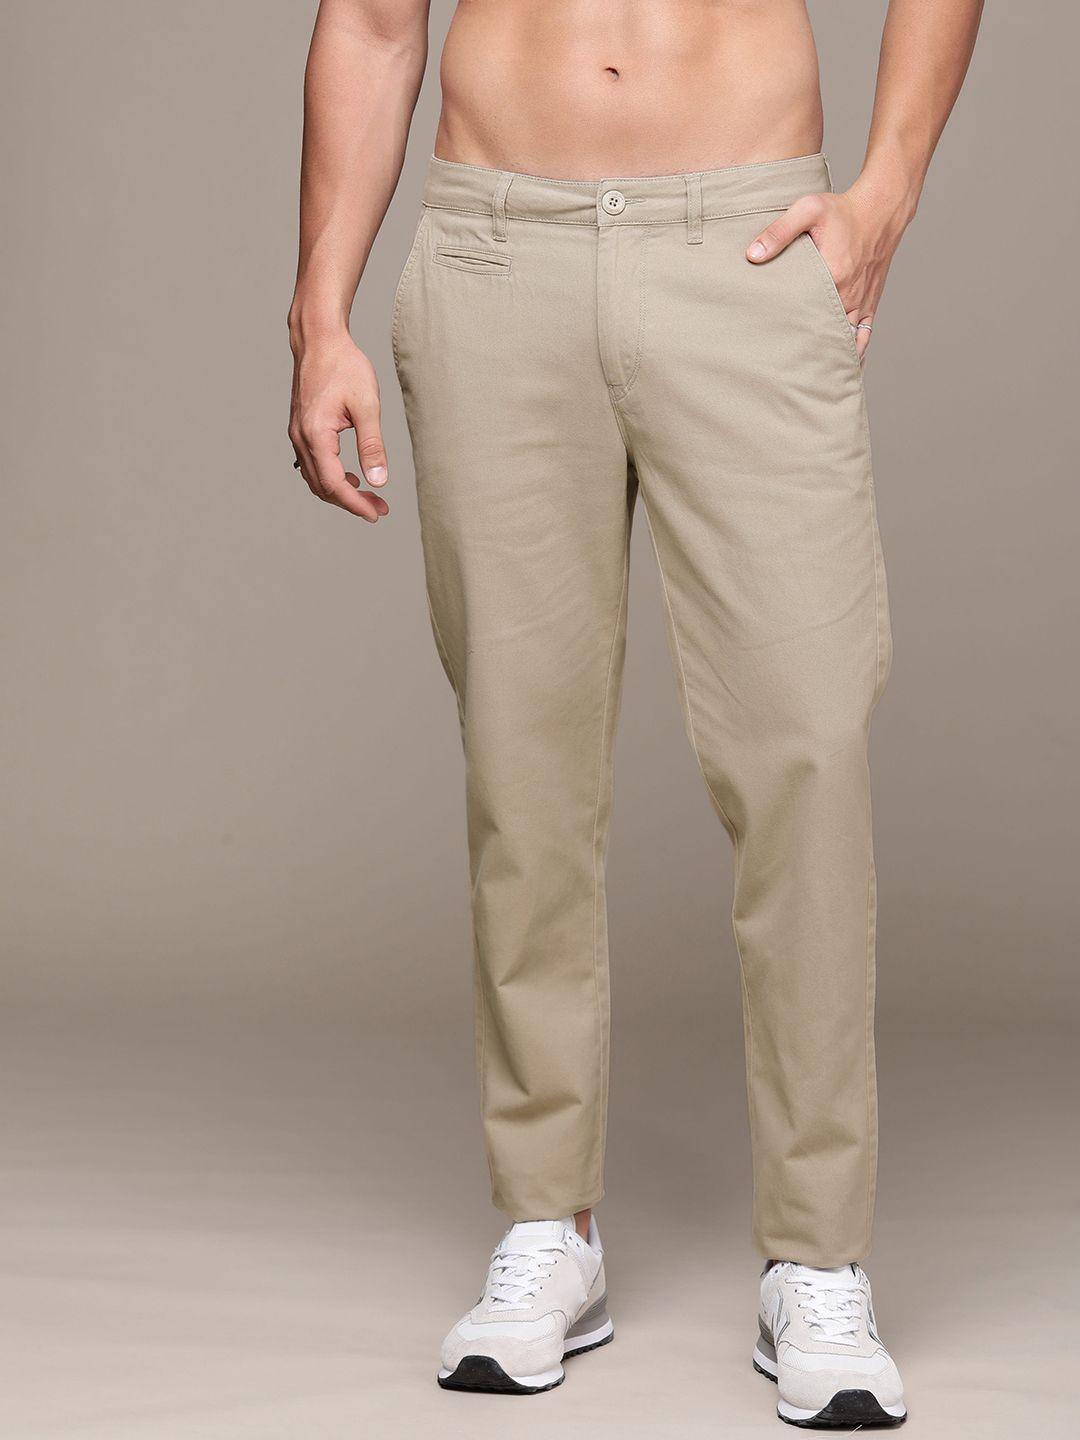 the-roadster-life-co.-men-solid-pure-cotton-regular-fit-chinos